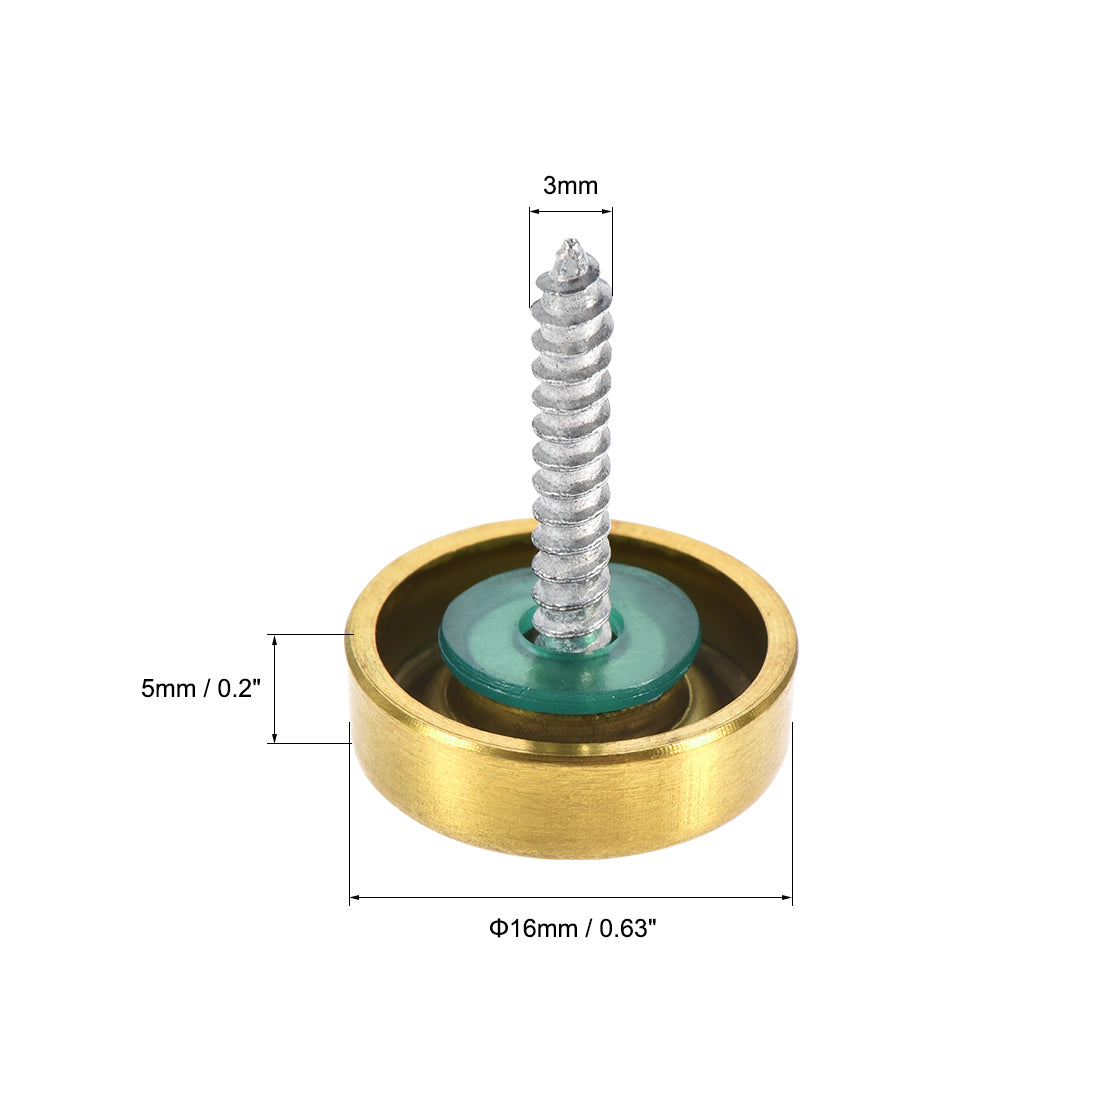 Uxcell Uxcell Mirror Screws, Decorative Cap Fasteners Cover Nails, Electroplated Wire Drawing, Golden 25mm/0.98" 12pcs